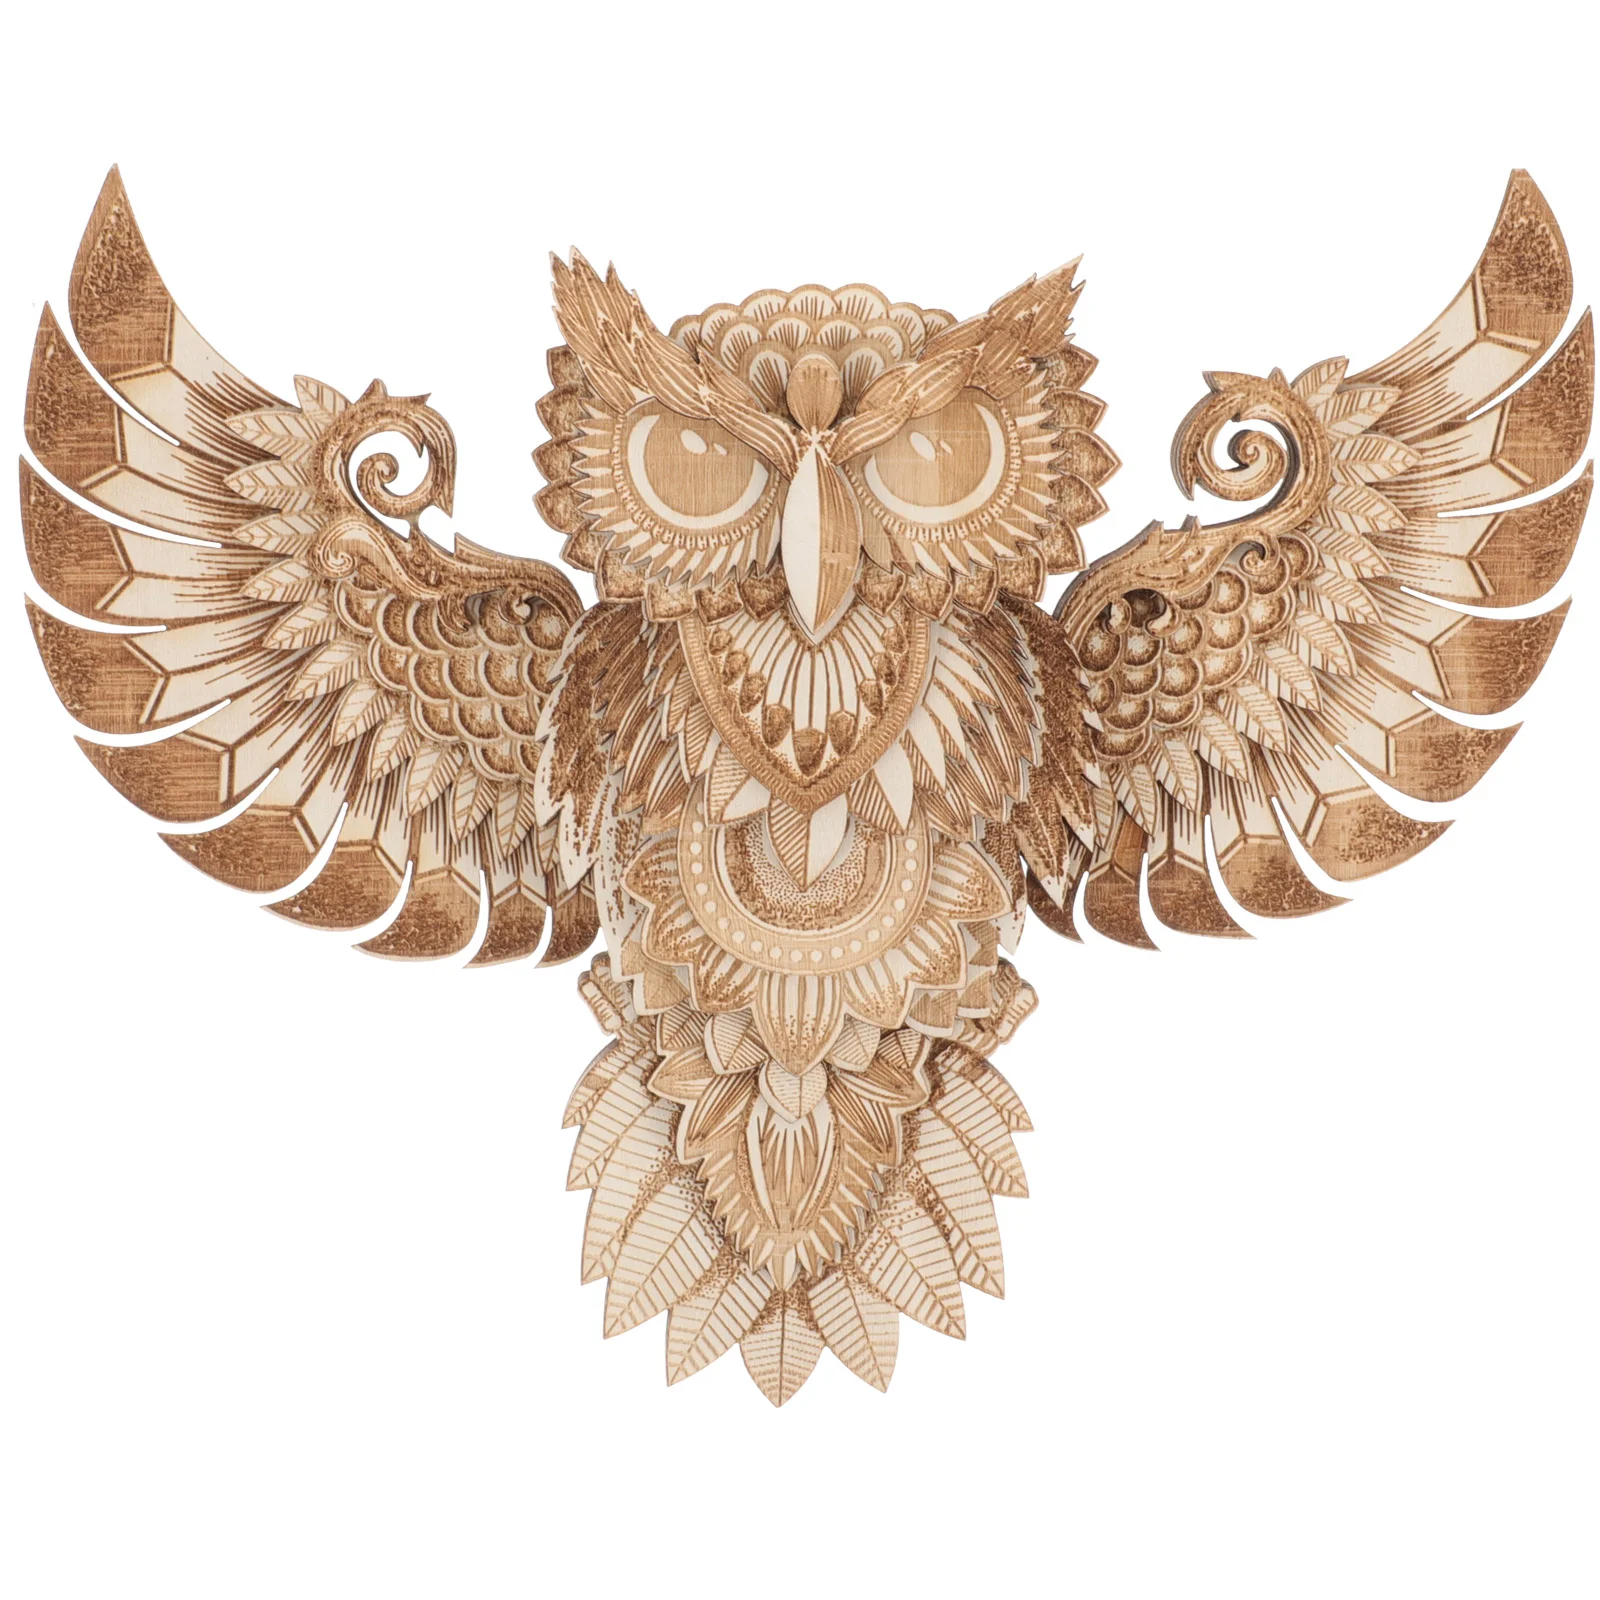 

Wooden Owl Adornment Wooden Owl Hanging Wall Decoration Wooden Owl Ornament For Home Owl Handicraft Pendant Decor Wooden Wall